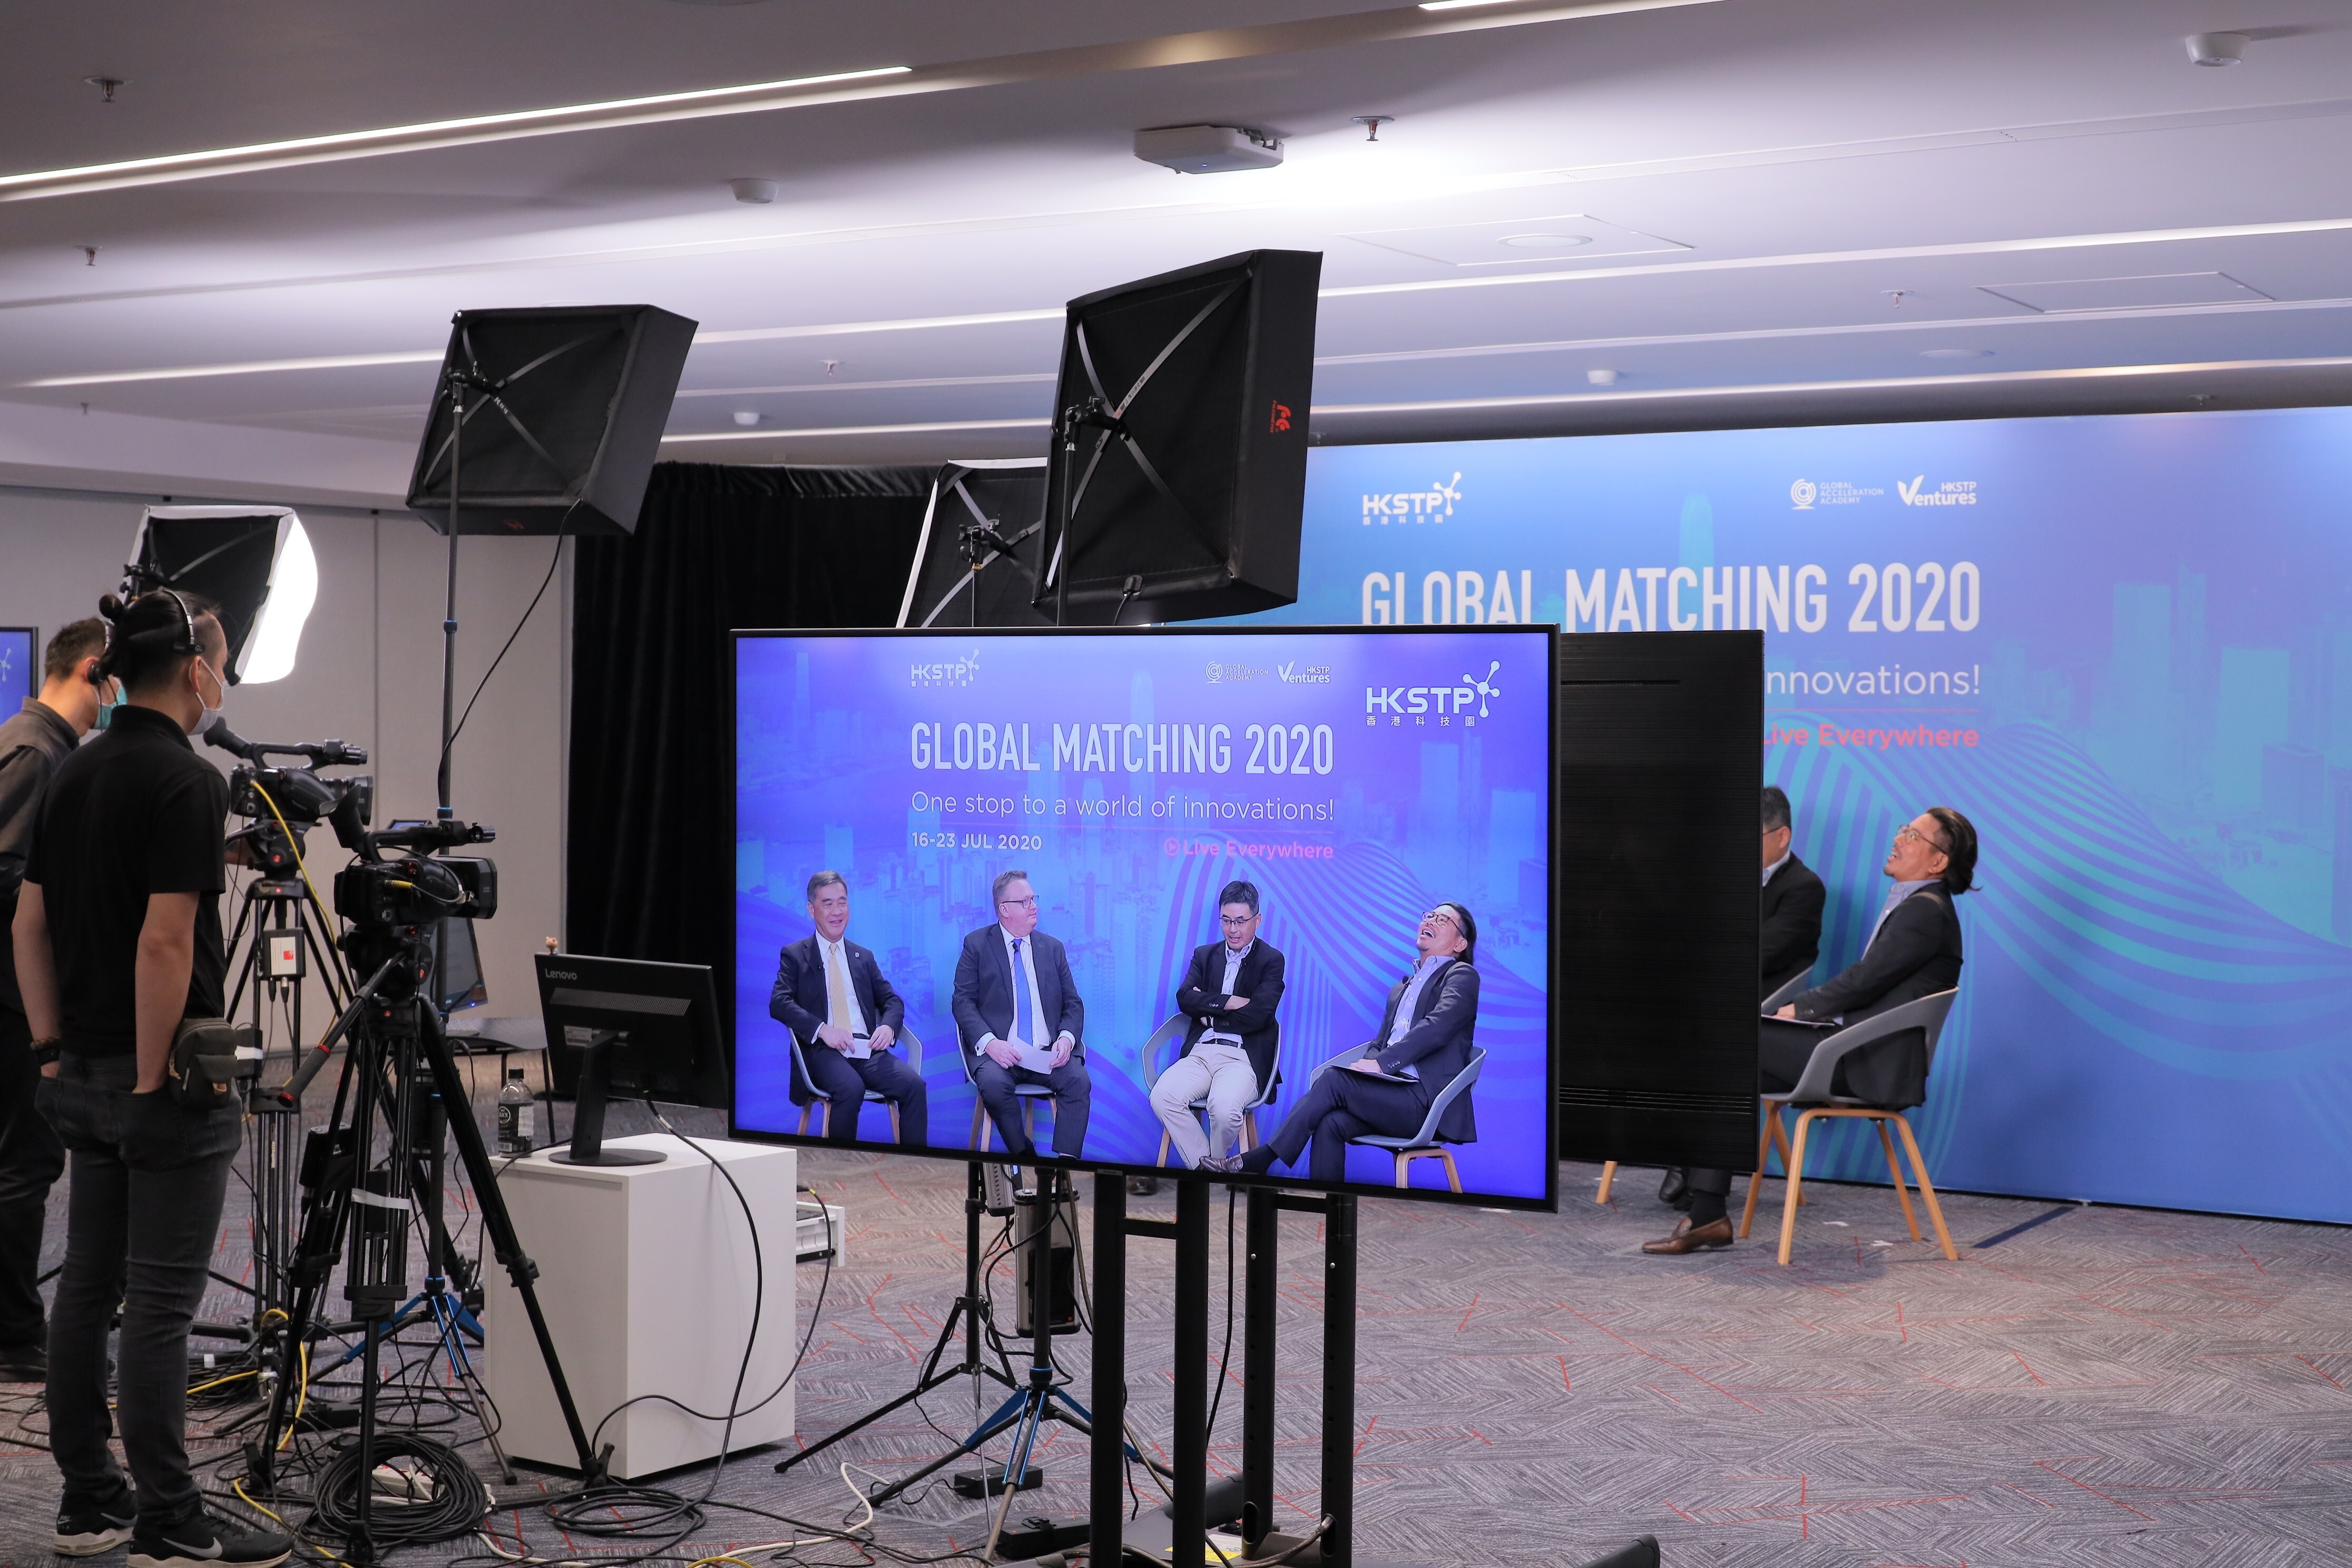 Global Matching 2020, Hong Kong Science and Technology Parks Corporation’s inaugural matchmaking initiative, attracts more than 270 pre-registered world-class corporates and regional investors with an array of local and overseas startups seeking fast track to unlock innovative potential.